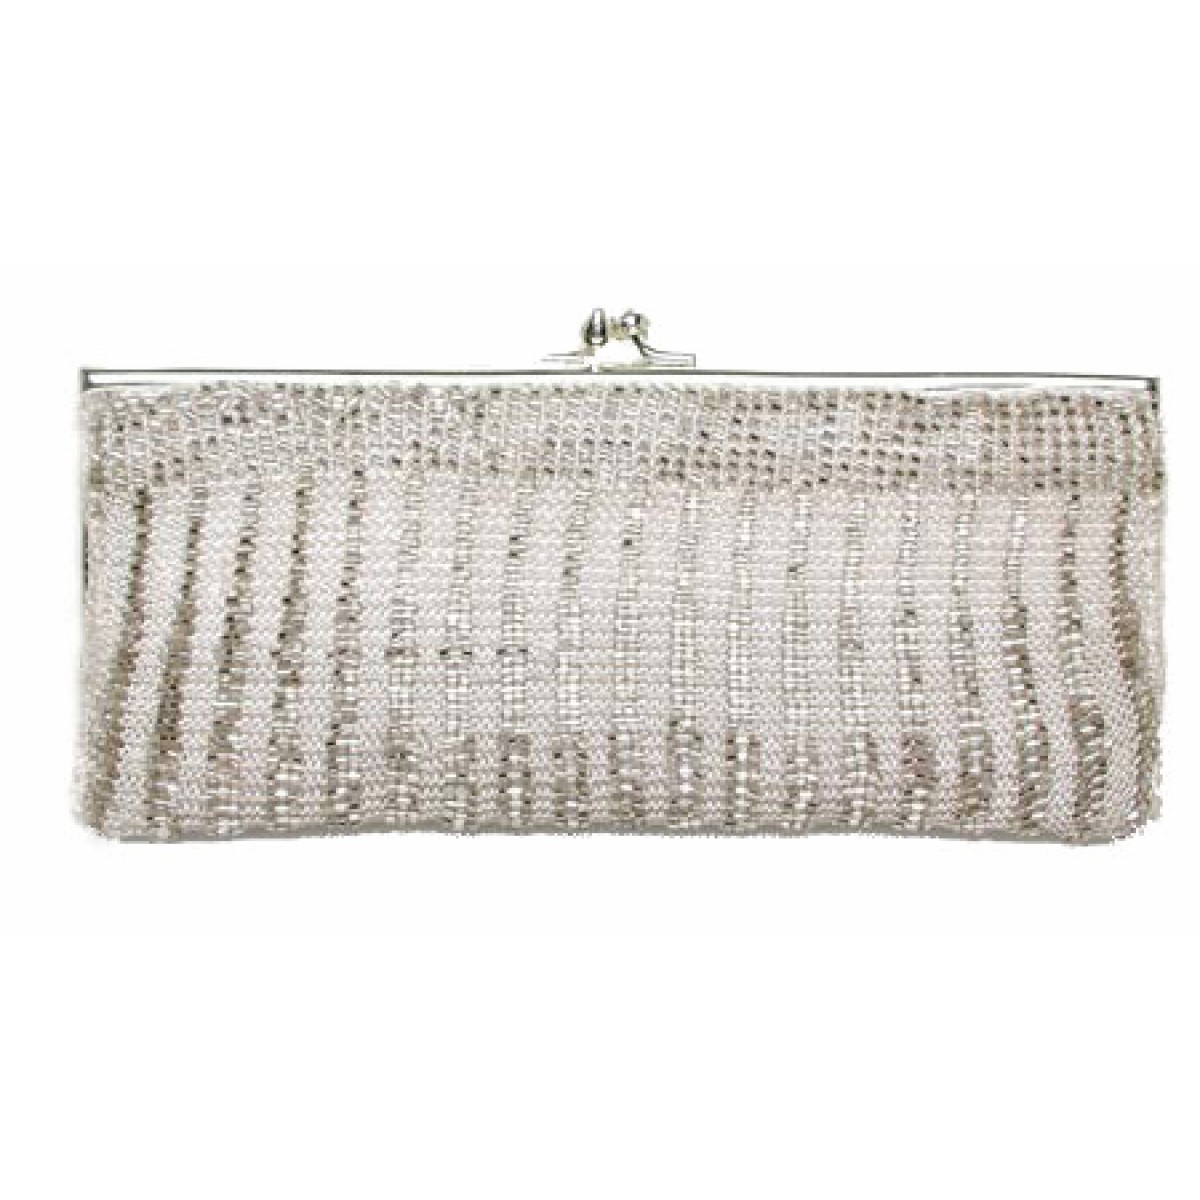 Crotched yarn with Glass Beading Clutch